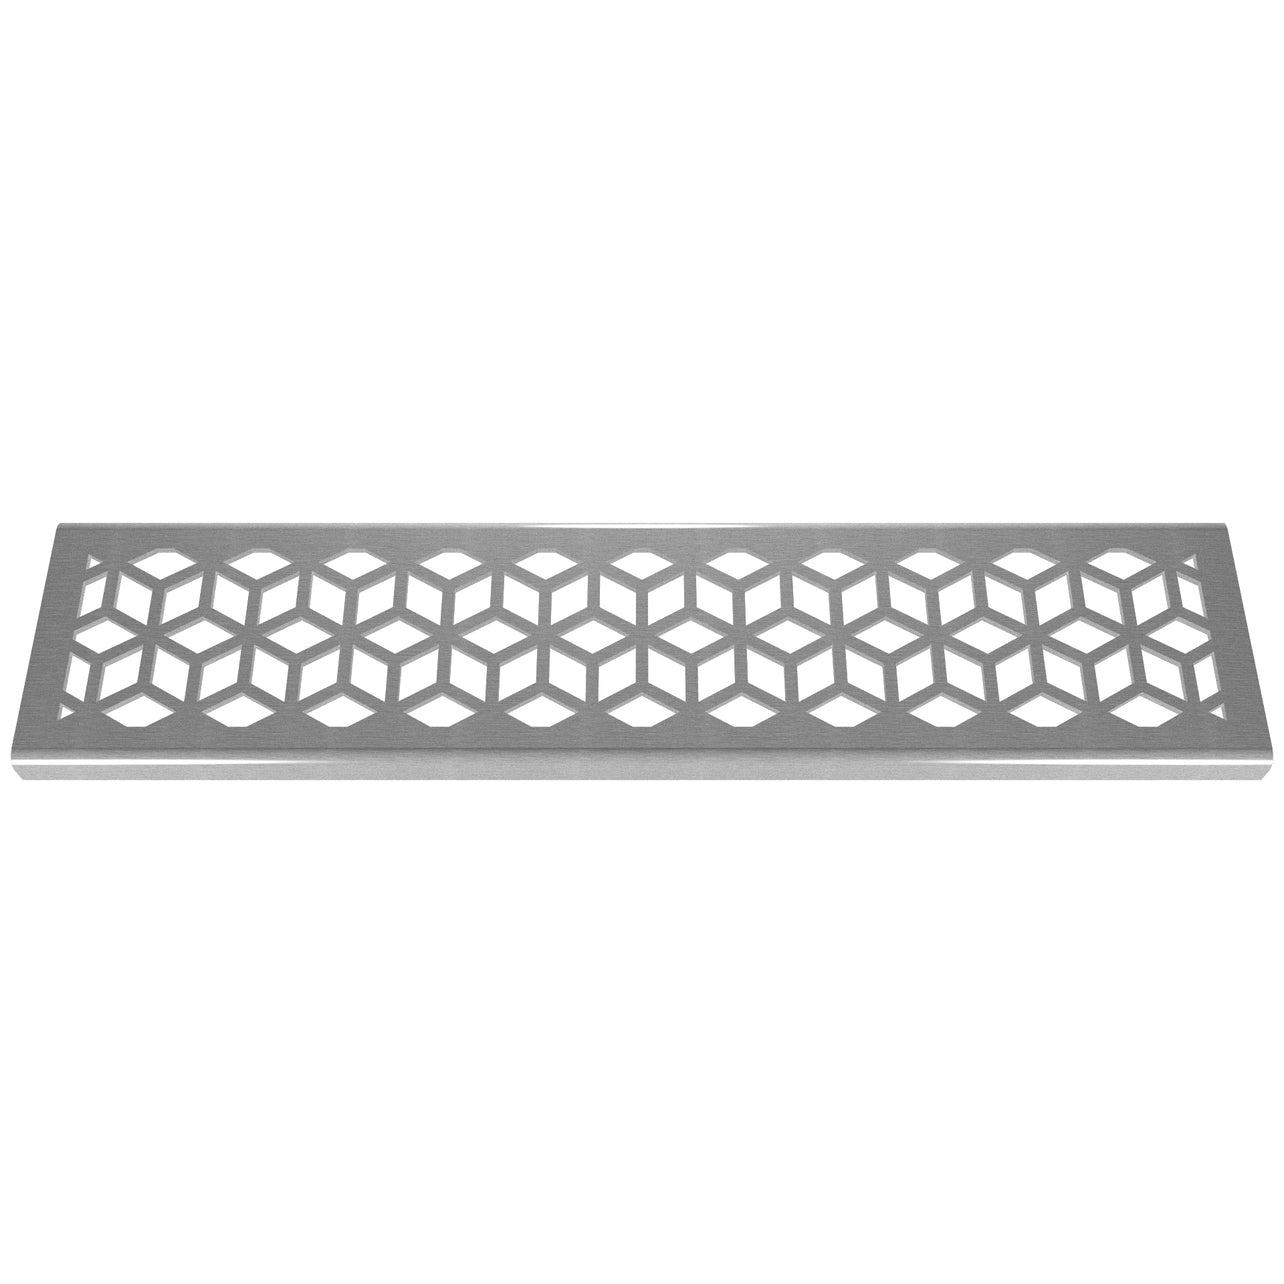 Rubix 304 Stainless Steel Channel Drain Grate 75 x 913mm (3 Inch)